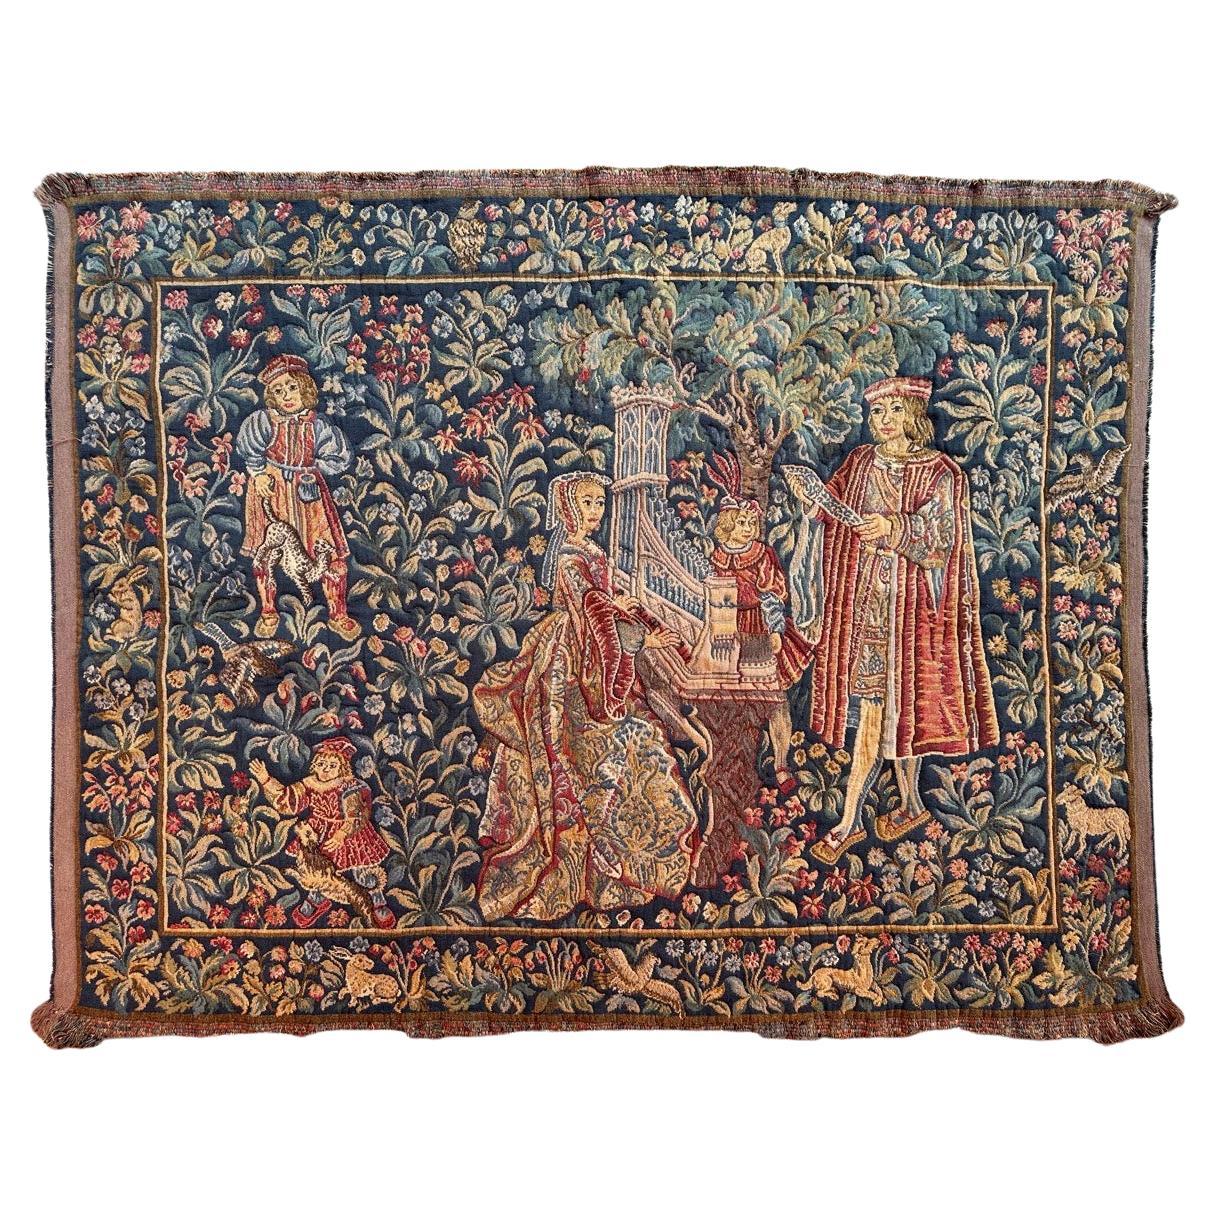 Bobyrug’s Nice Vintage Aubusson Style Jaquar Tapestry with Medieval Museum Desig For Sale